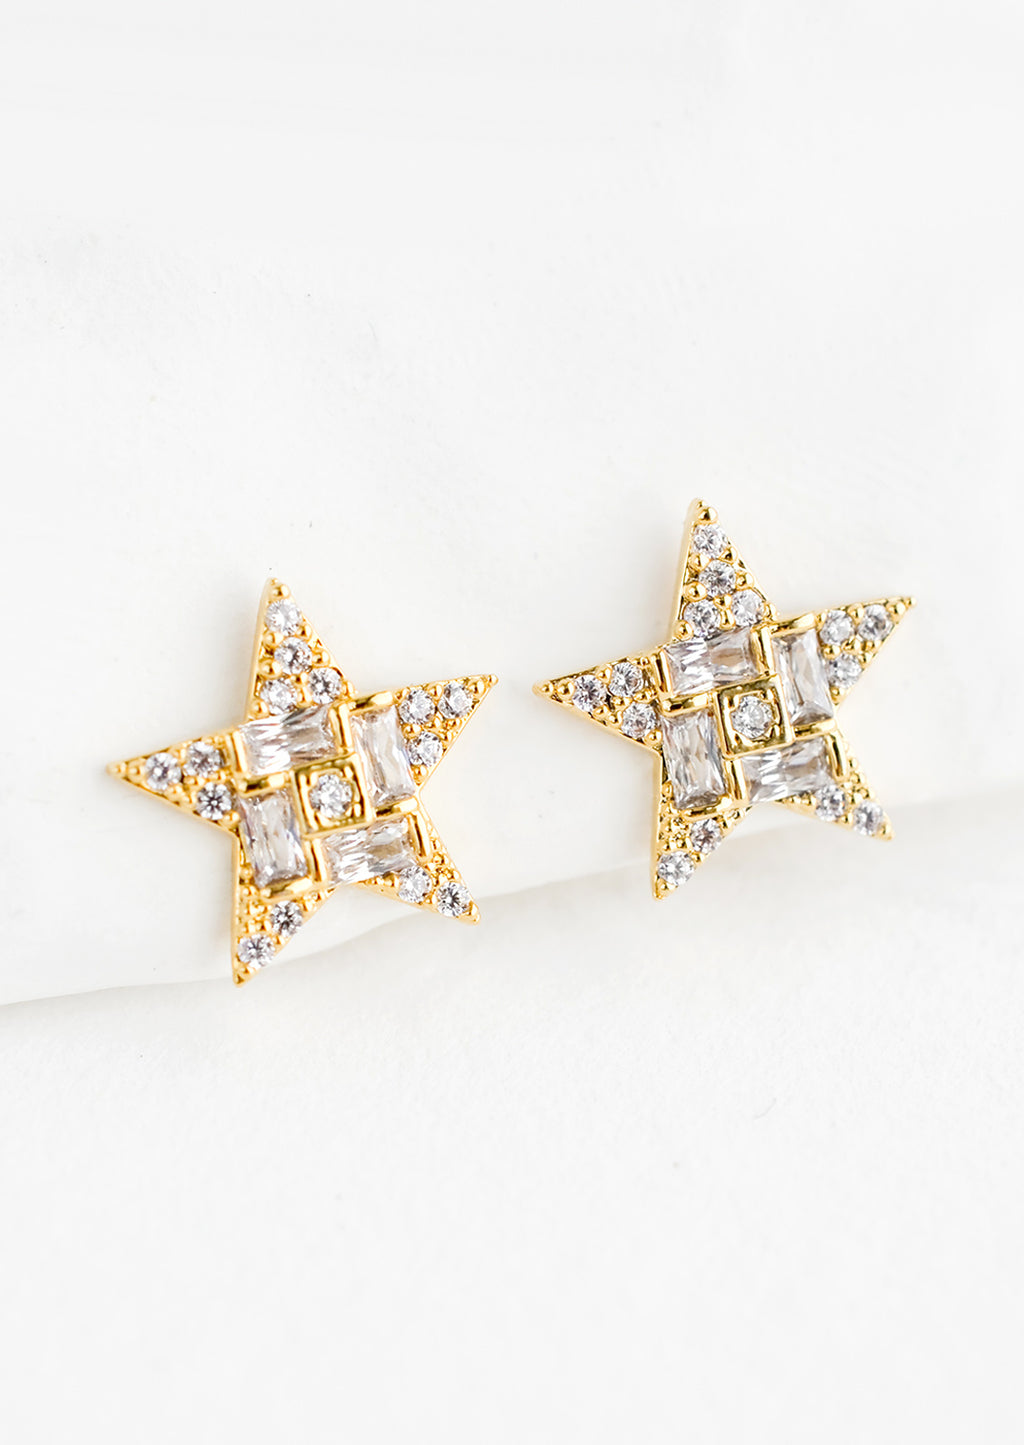 1: A pair of gold star shaped stud earrings with crystal pave detailing.